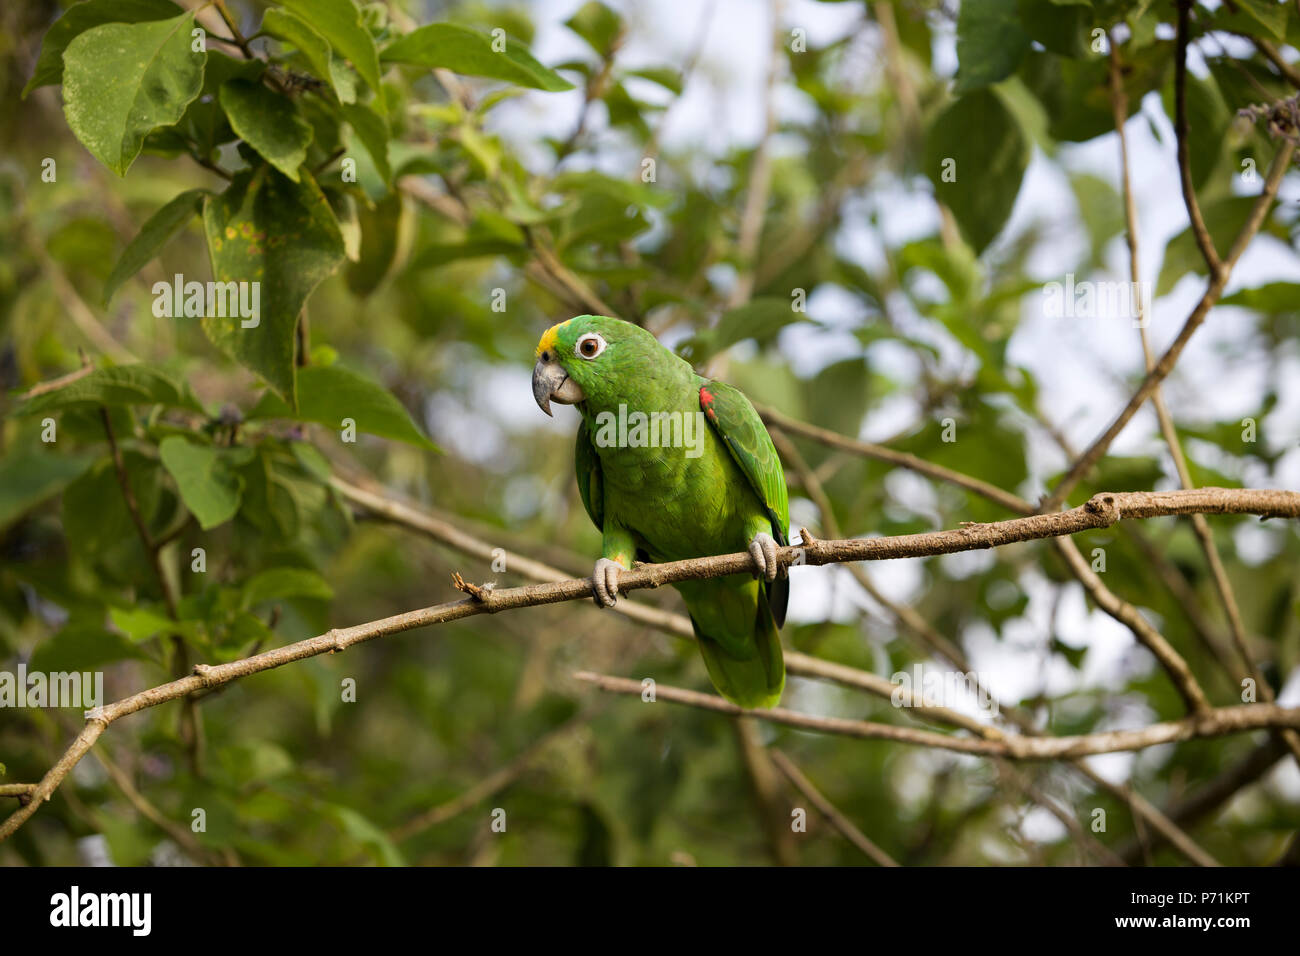 Beautiful green parrot bird in the forest habitat, sitting on the tree with green ...1300 x 956